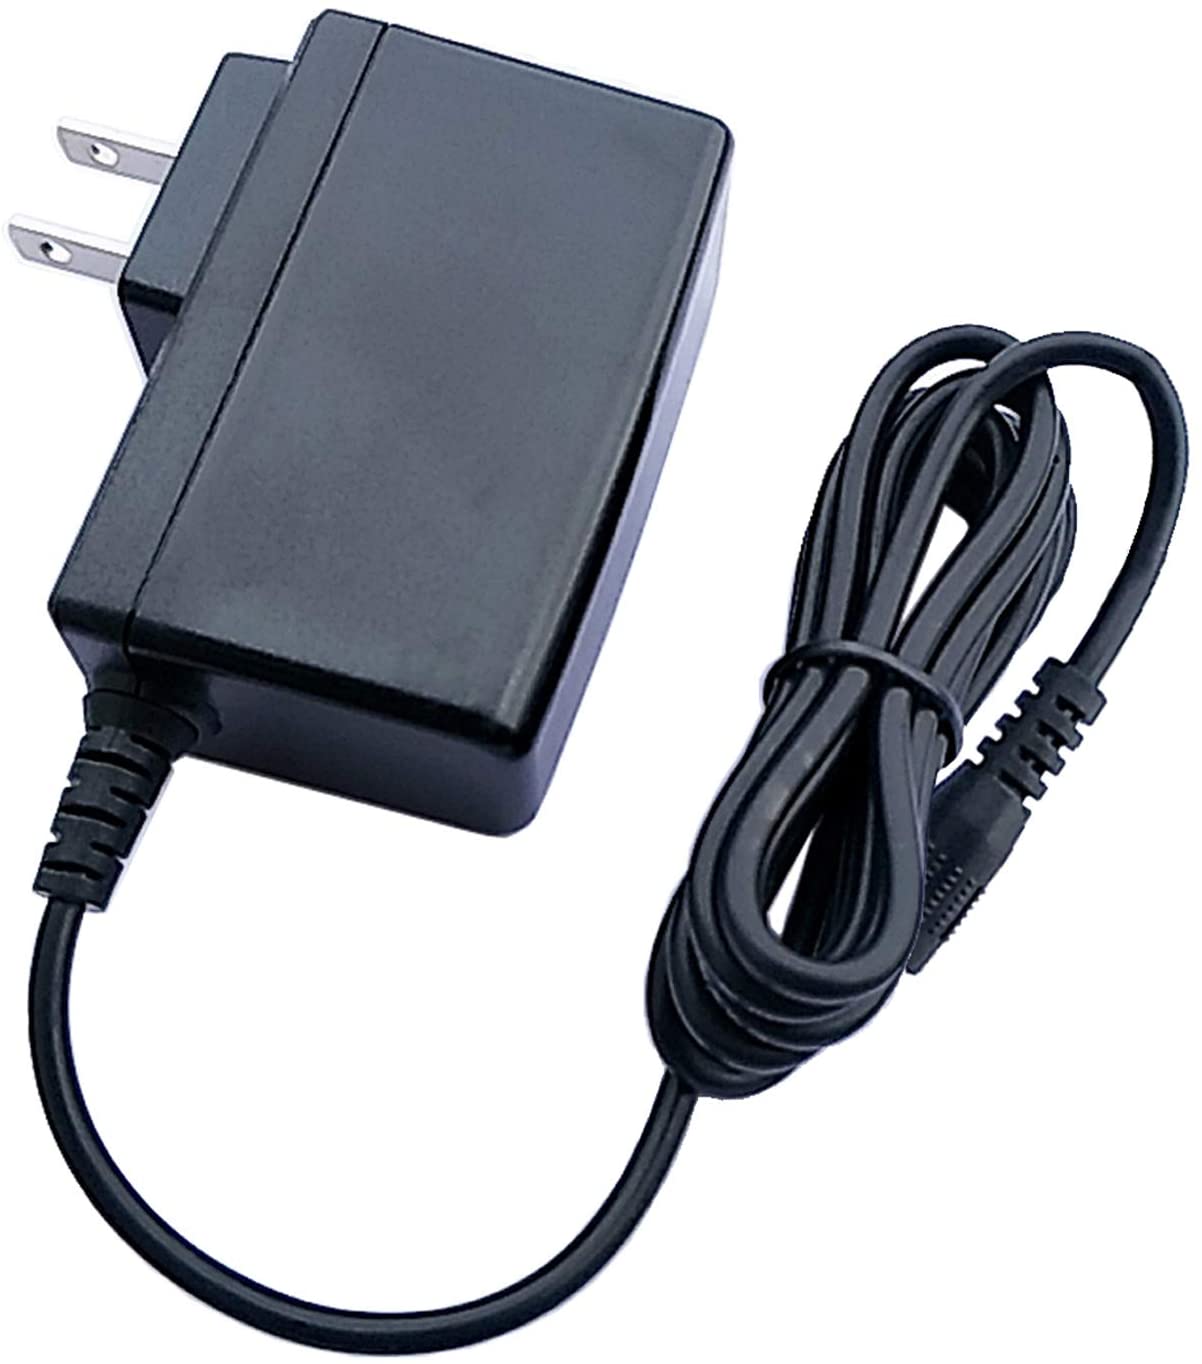 UPBRIGHT AC Adapter For NordicTrack AUDIOSTRIDER 800 Elliptical Exerciser 831.236670 831.236671 831.236672 831.236673 NTEL77060 NTEL77061 NTEL77062 Power Supply Cord + Charger - image 2 of 3